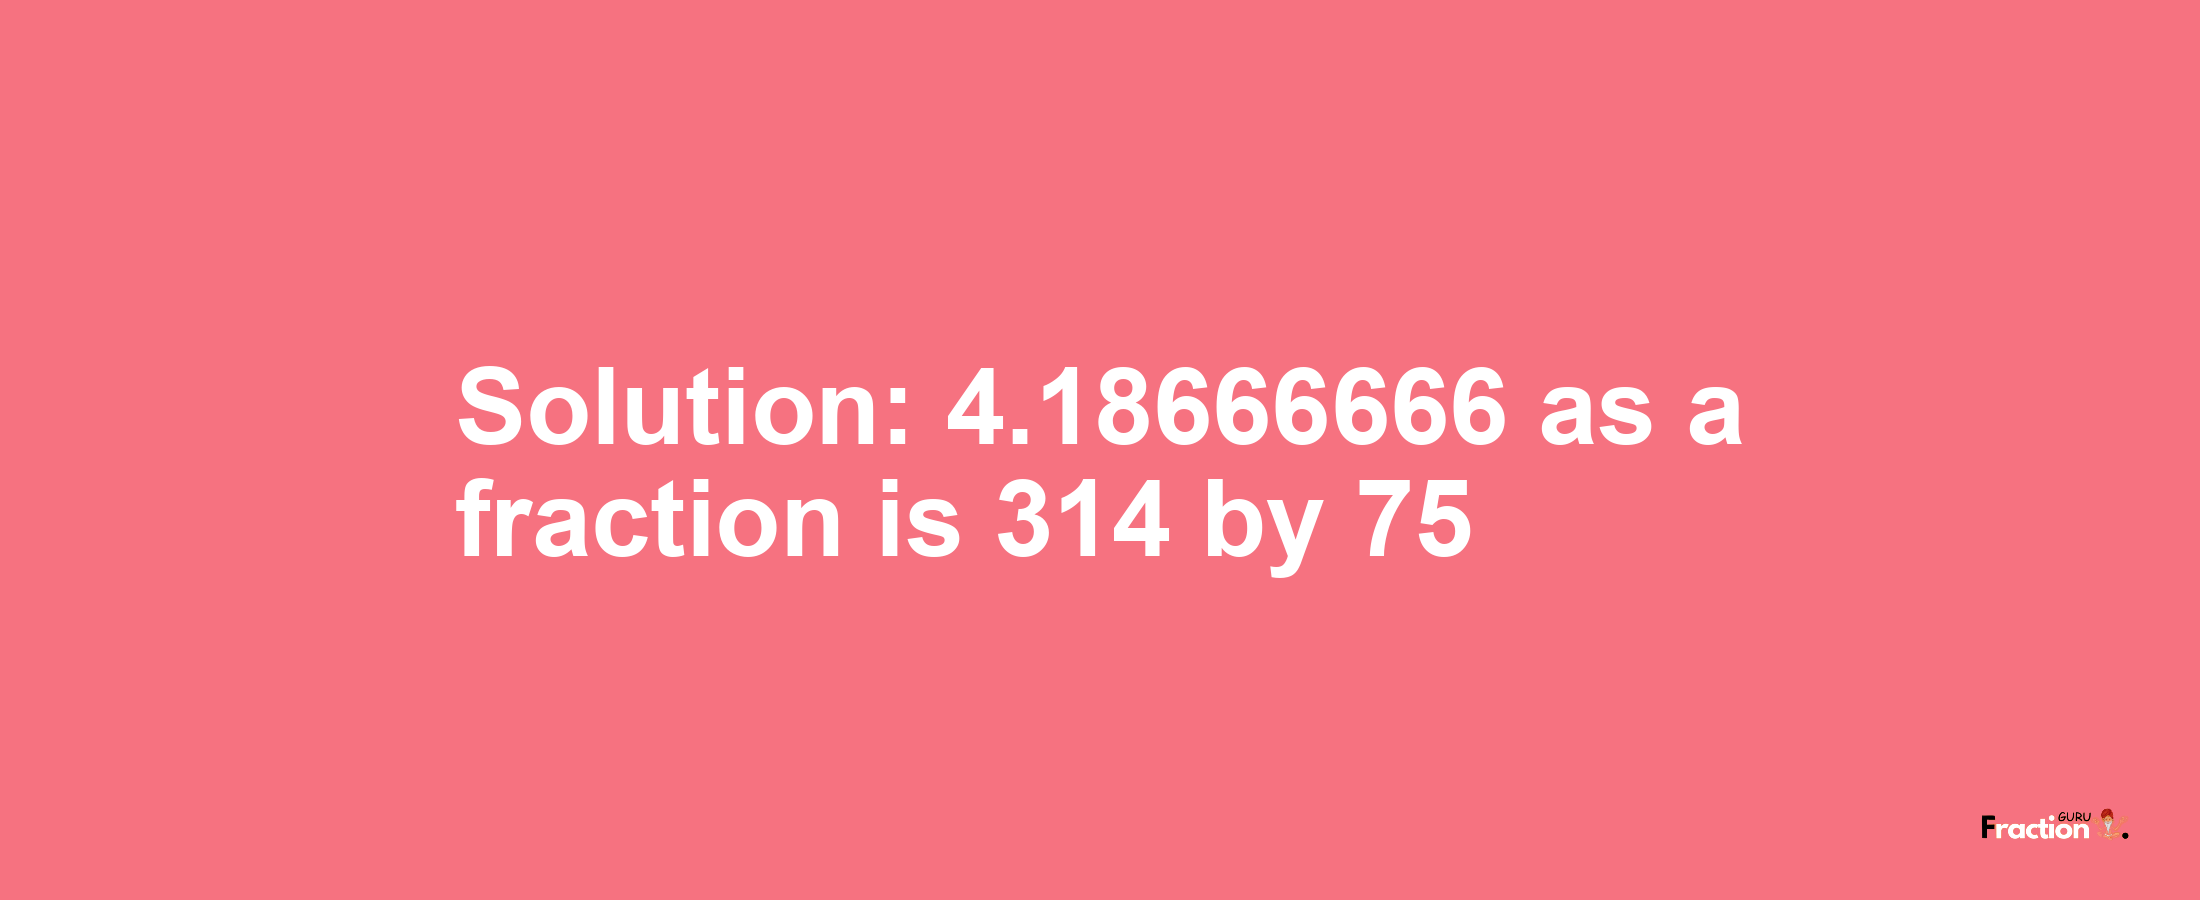 Solution:4.18666666 as a fraction is 314/75